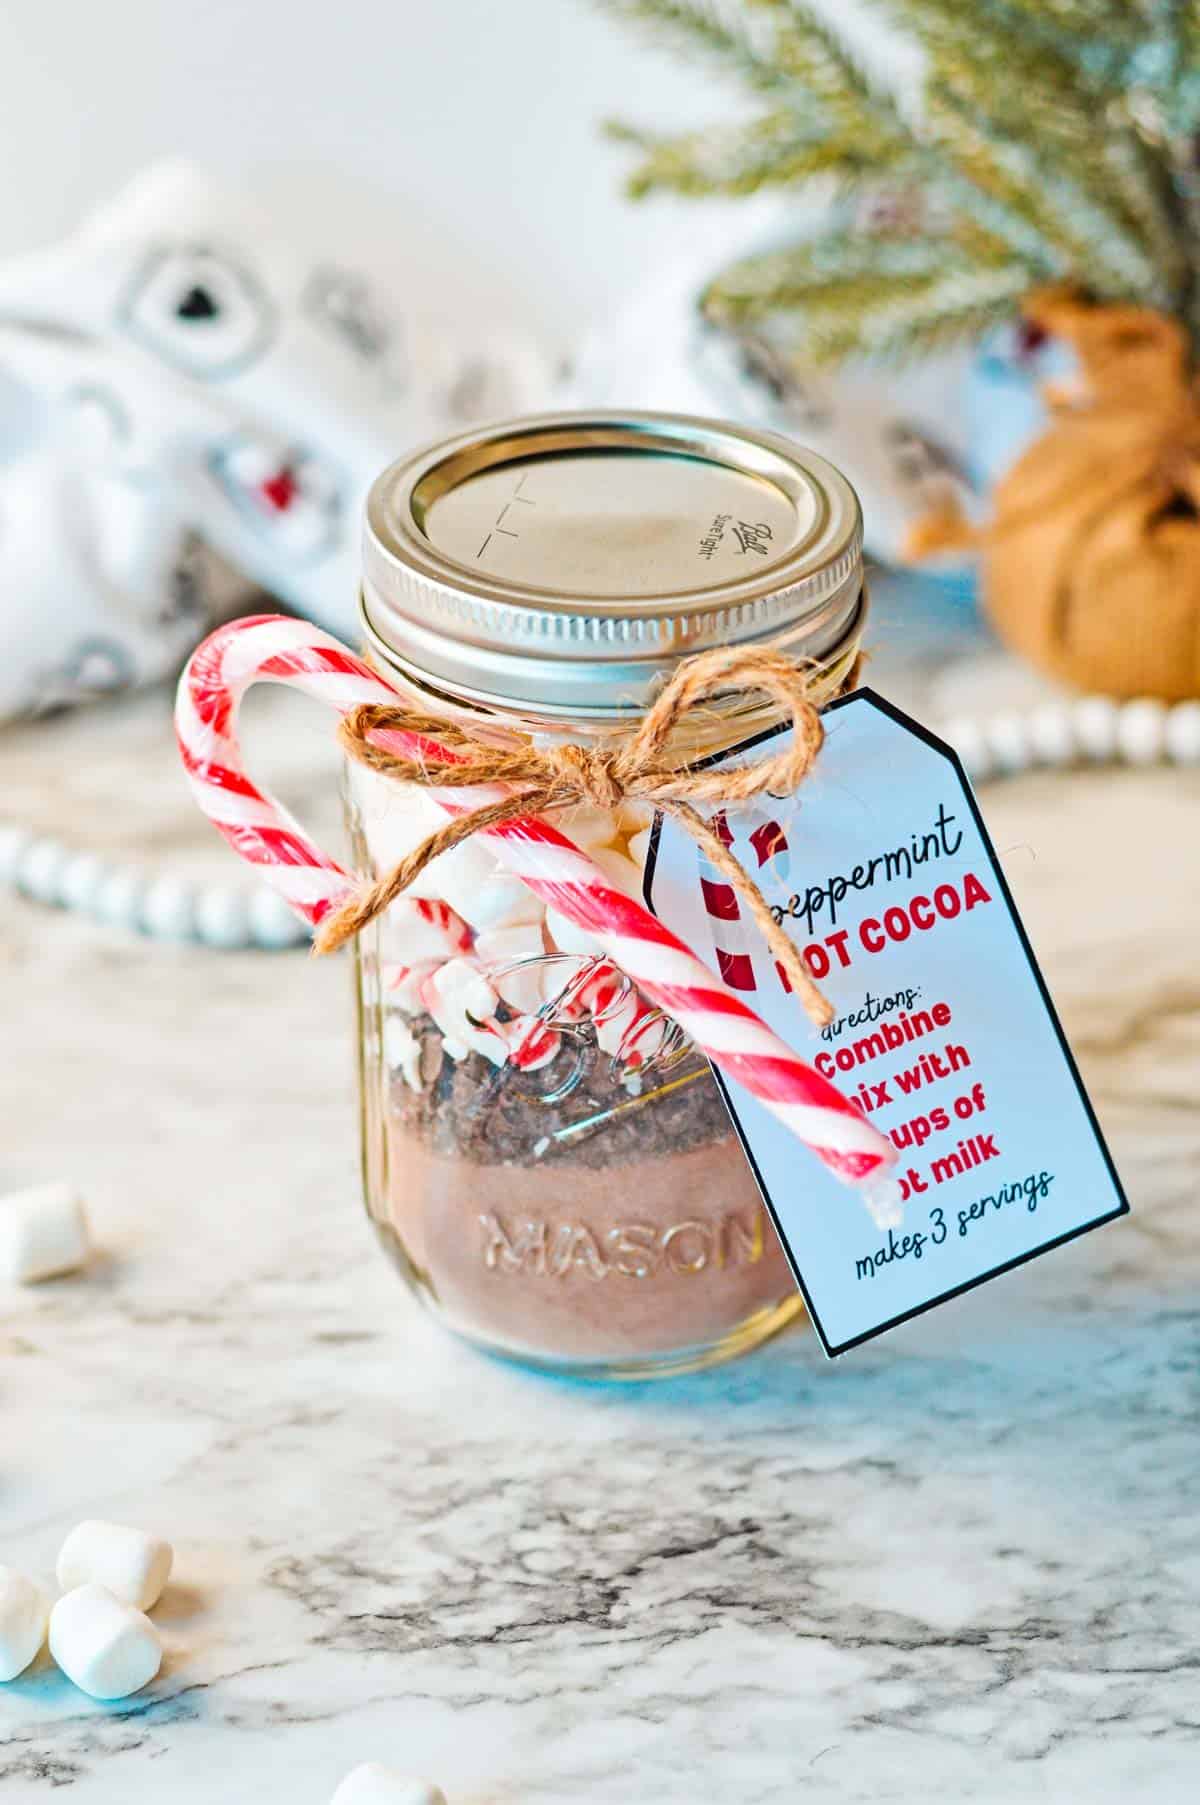 A mason jar with hot cocoa mix, chocolate chips, crushed peppermint, and marshmallows labeled with an instruction tag.